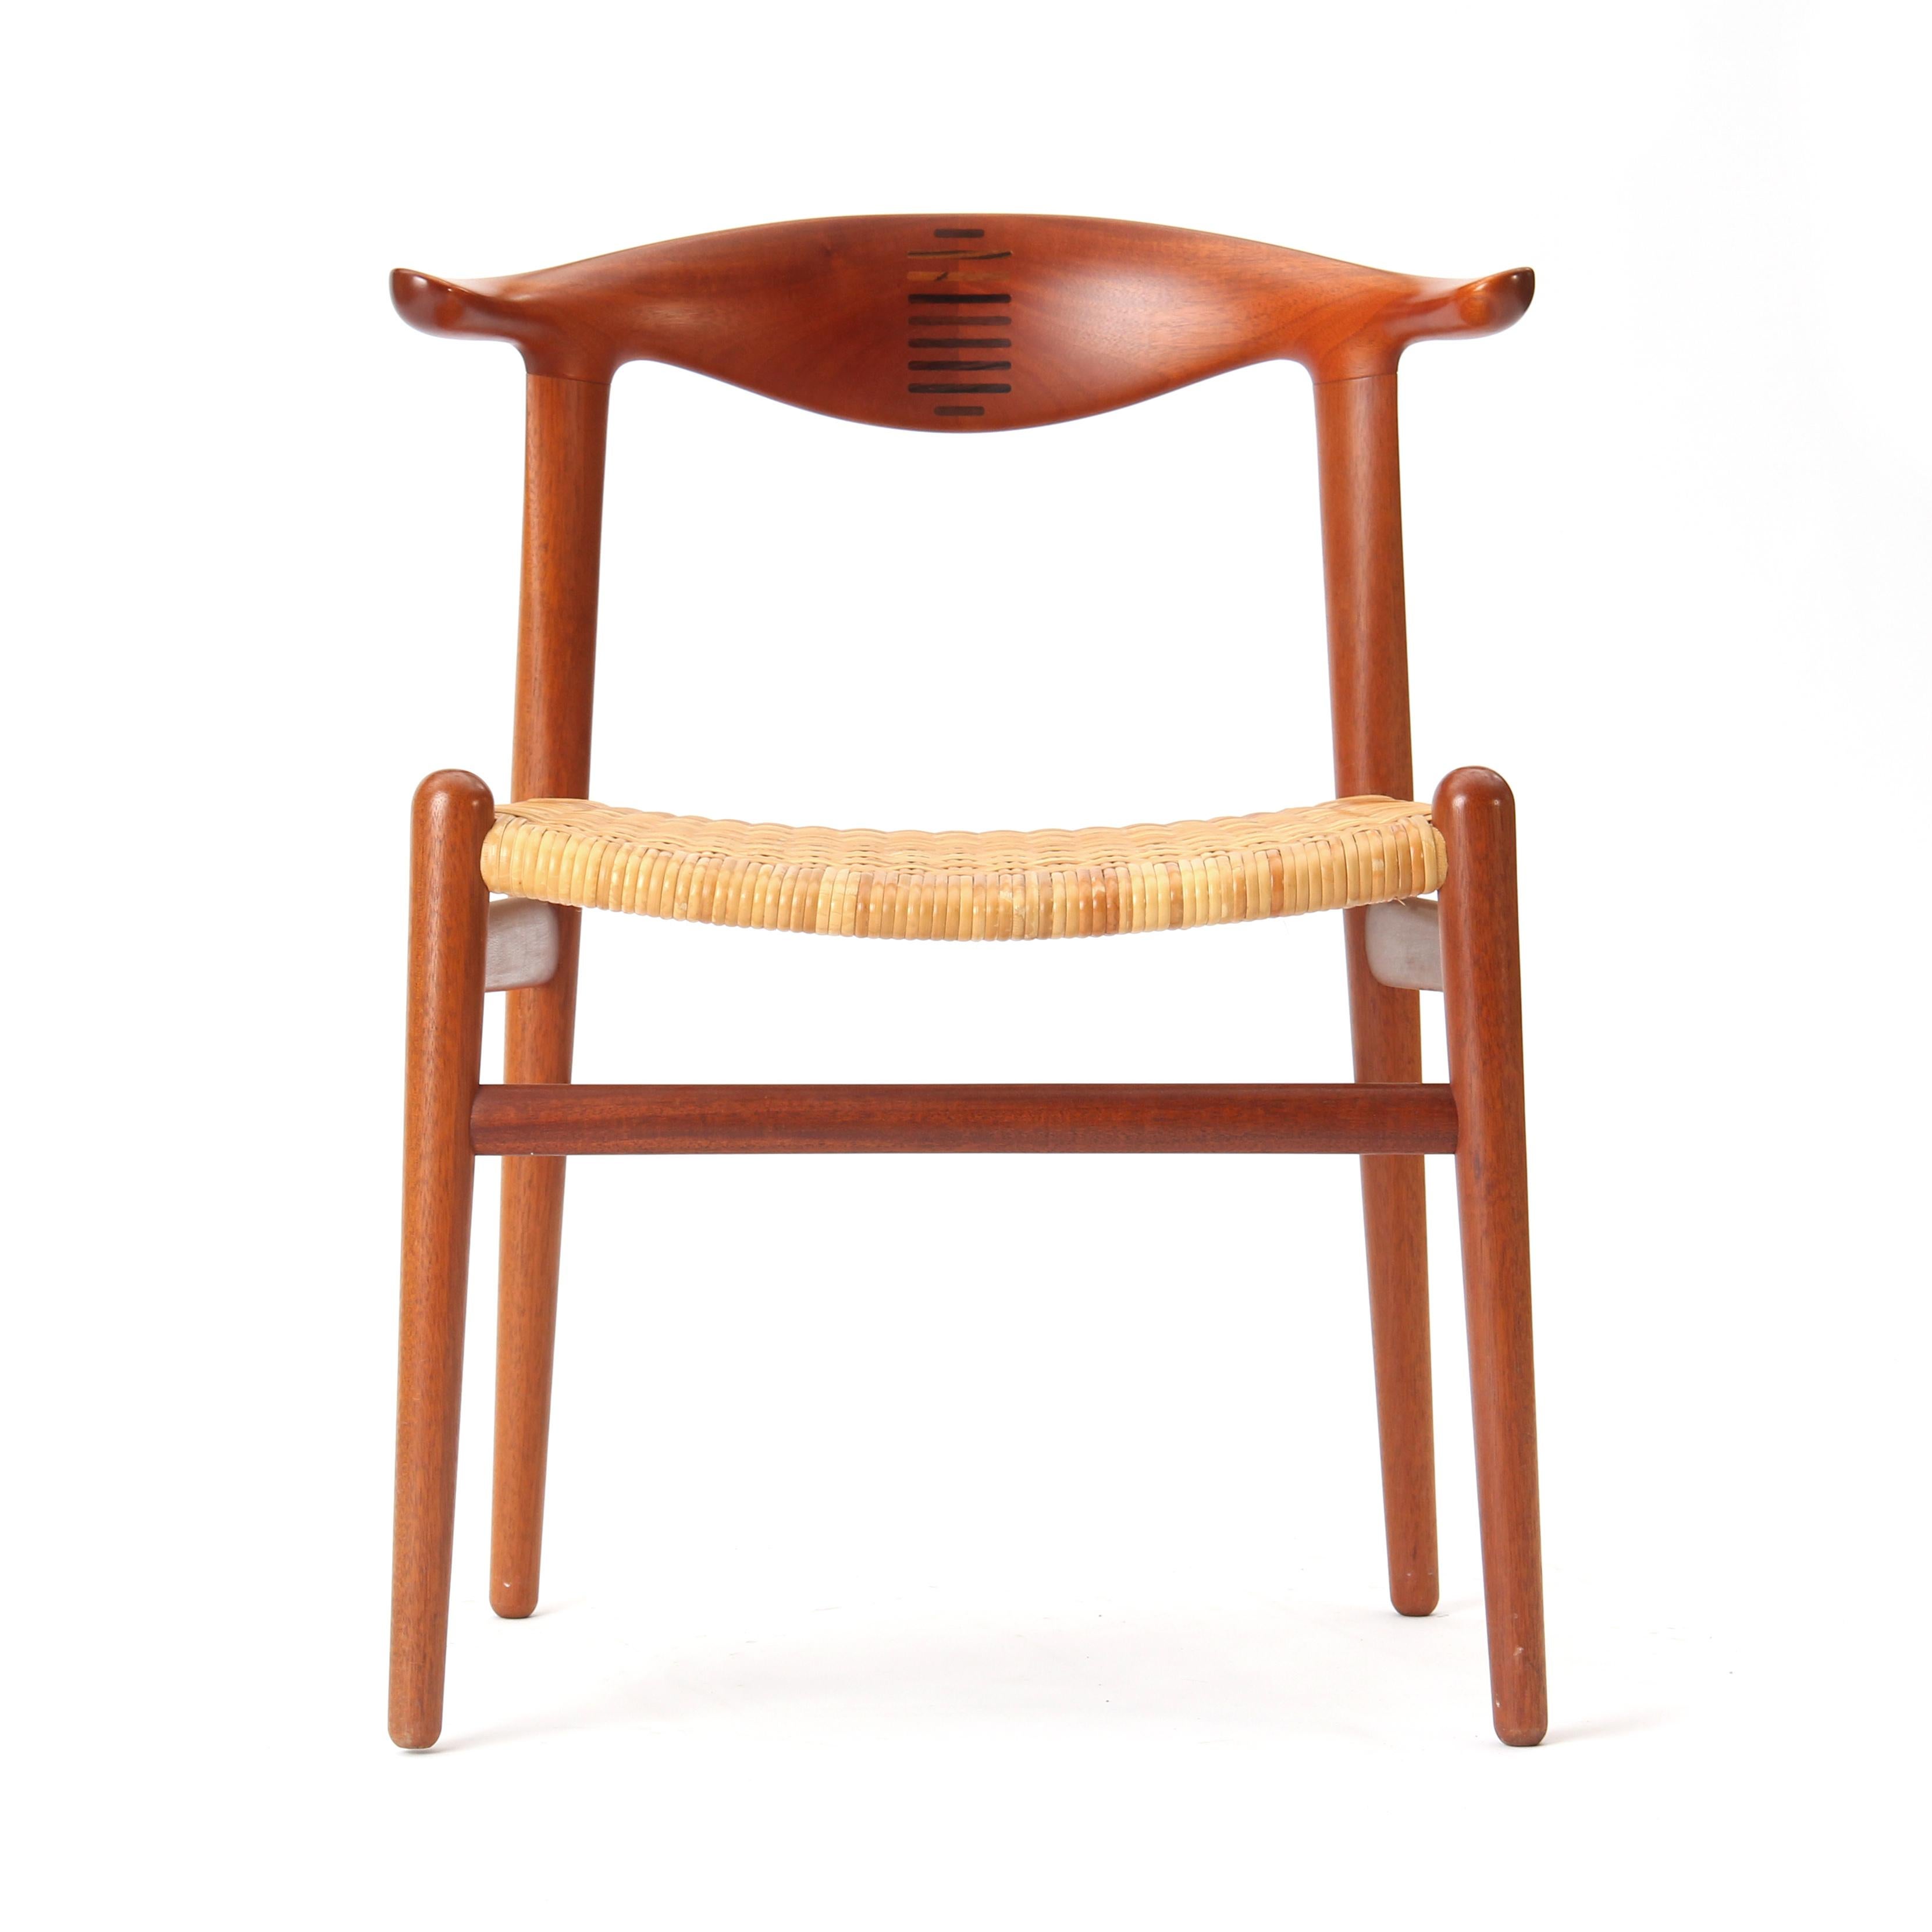 A rare teak Danish modern dining chair with a splined backrest and a natural cane seat. Model JH-505 was designed in 1952 by Hans J. Wegner and produced in the 1960s by Johannes Hansen.